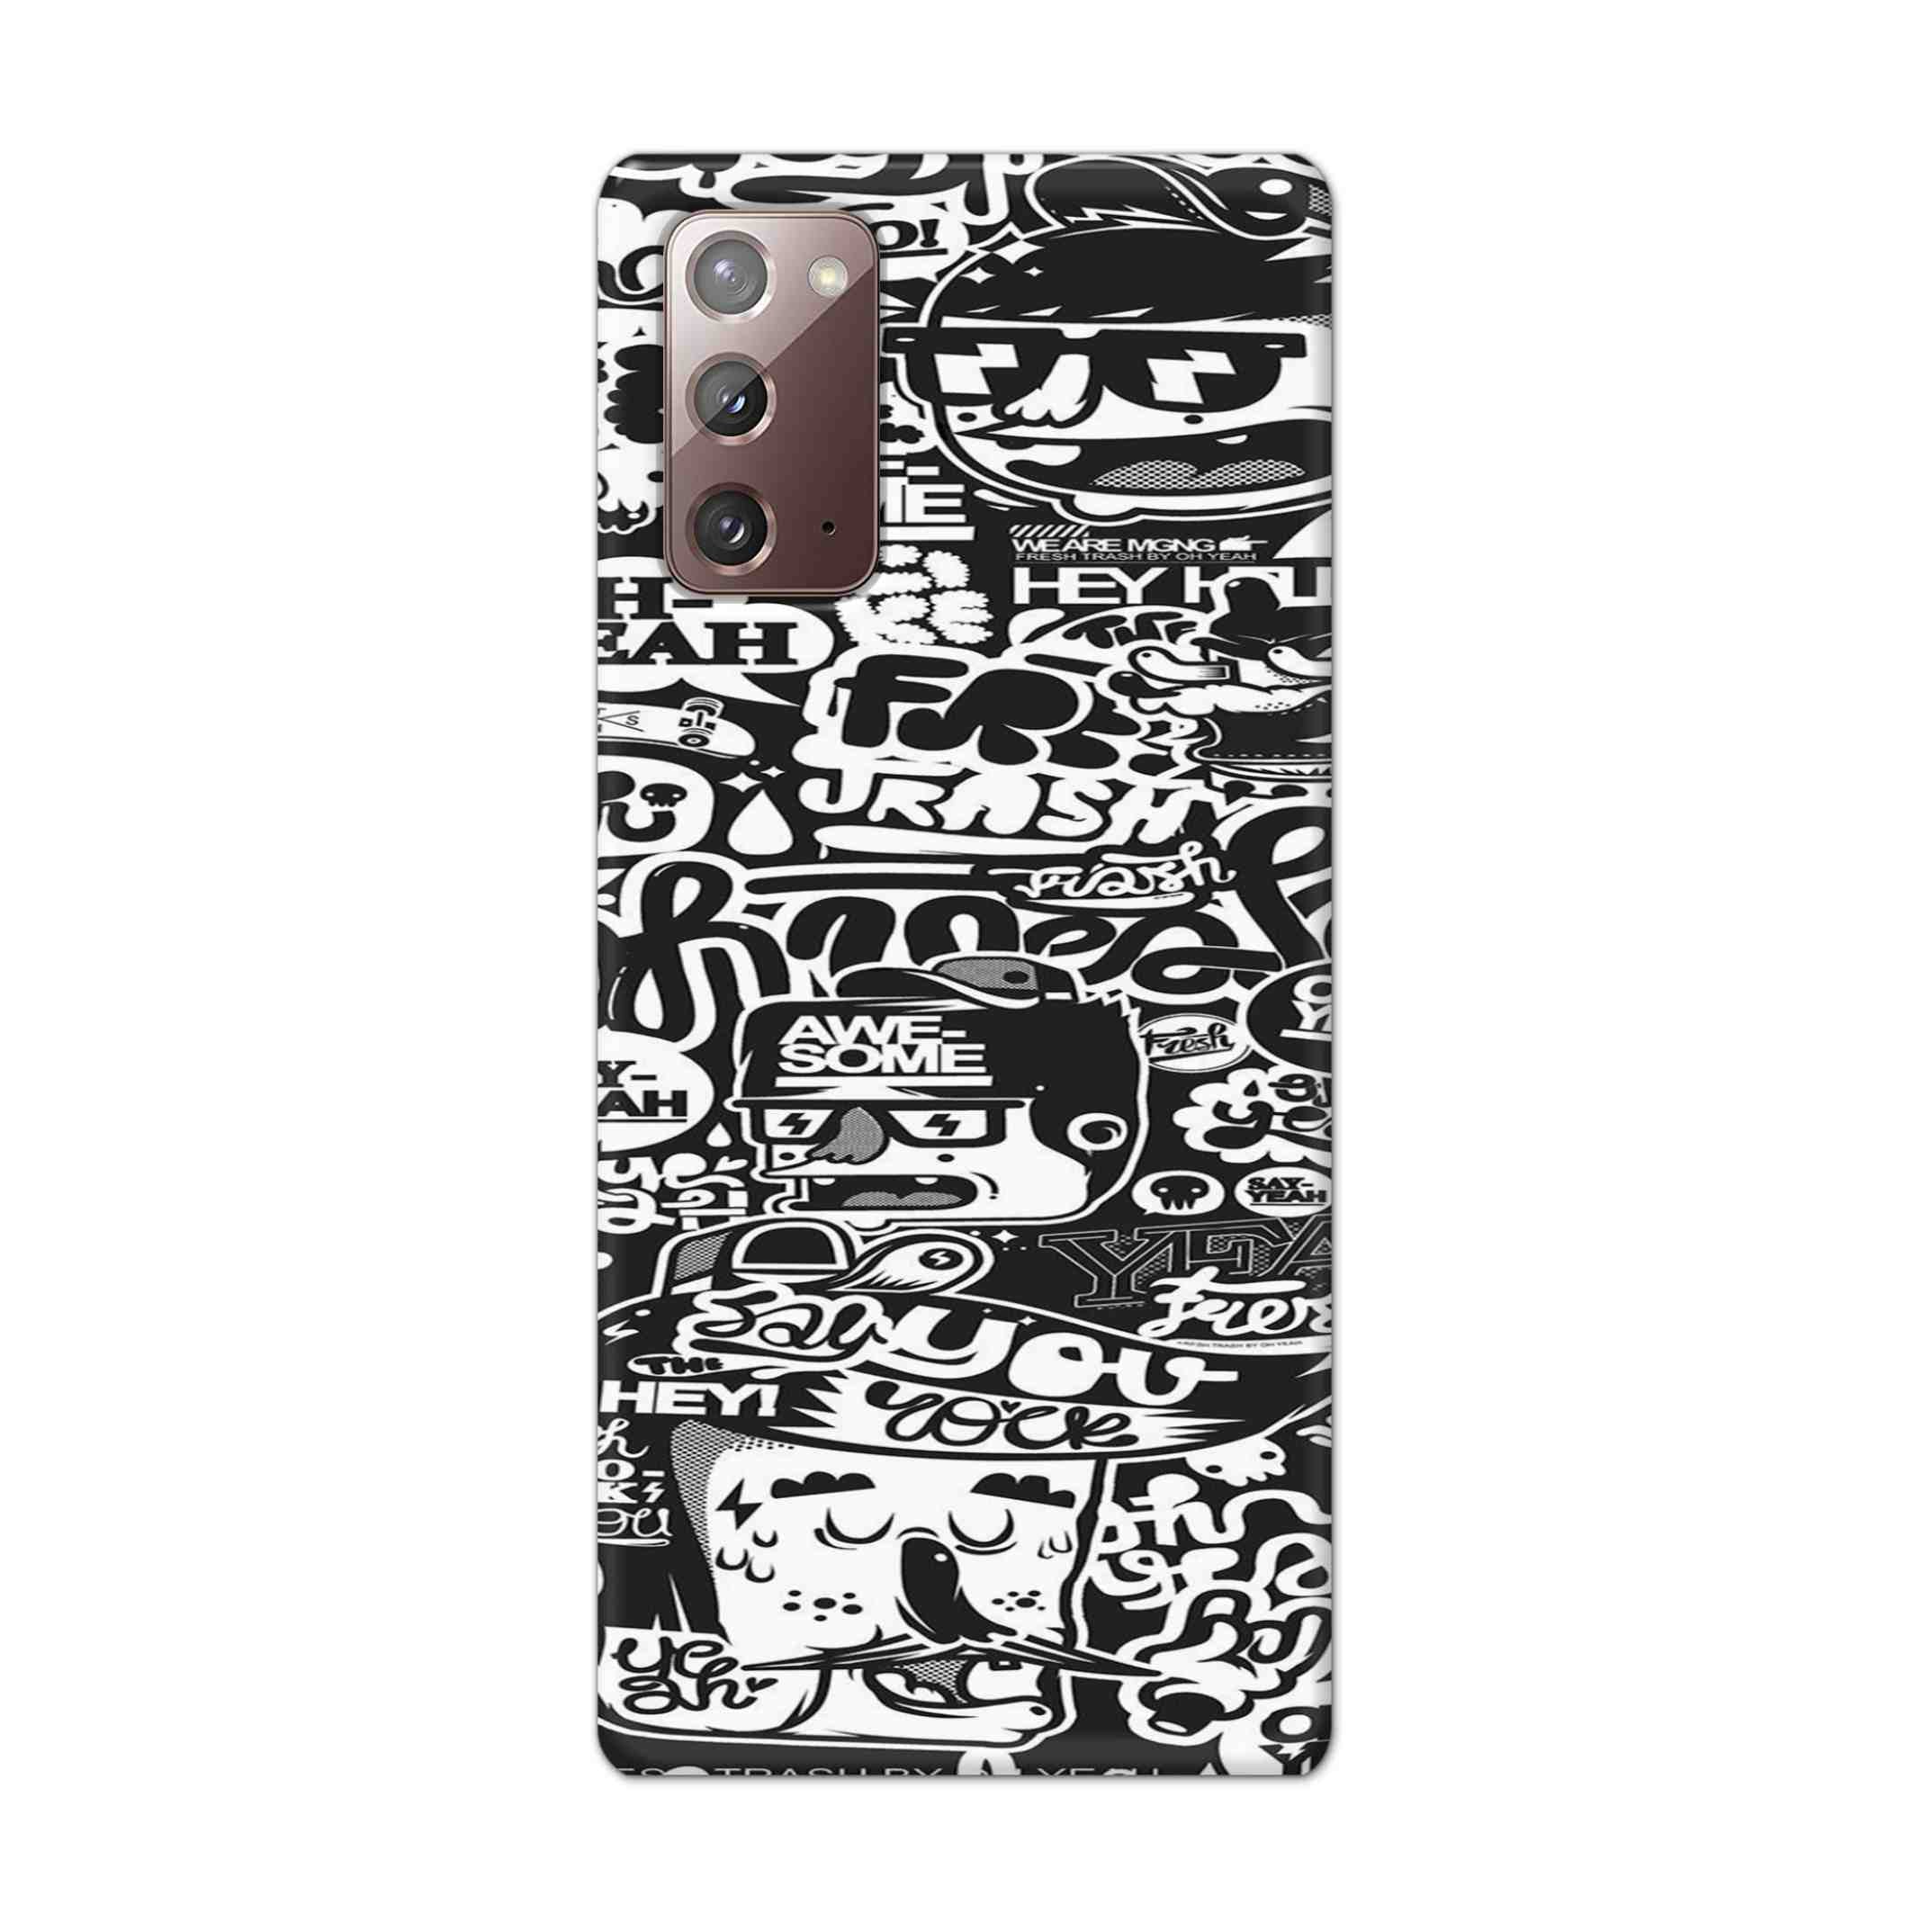 Buy Awesome Hard Back Mobile Phone Case Cover For Samsung Galaxy Note 20 Online